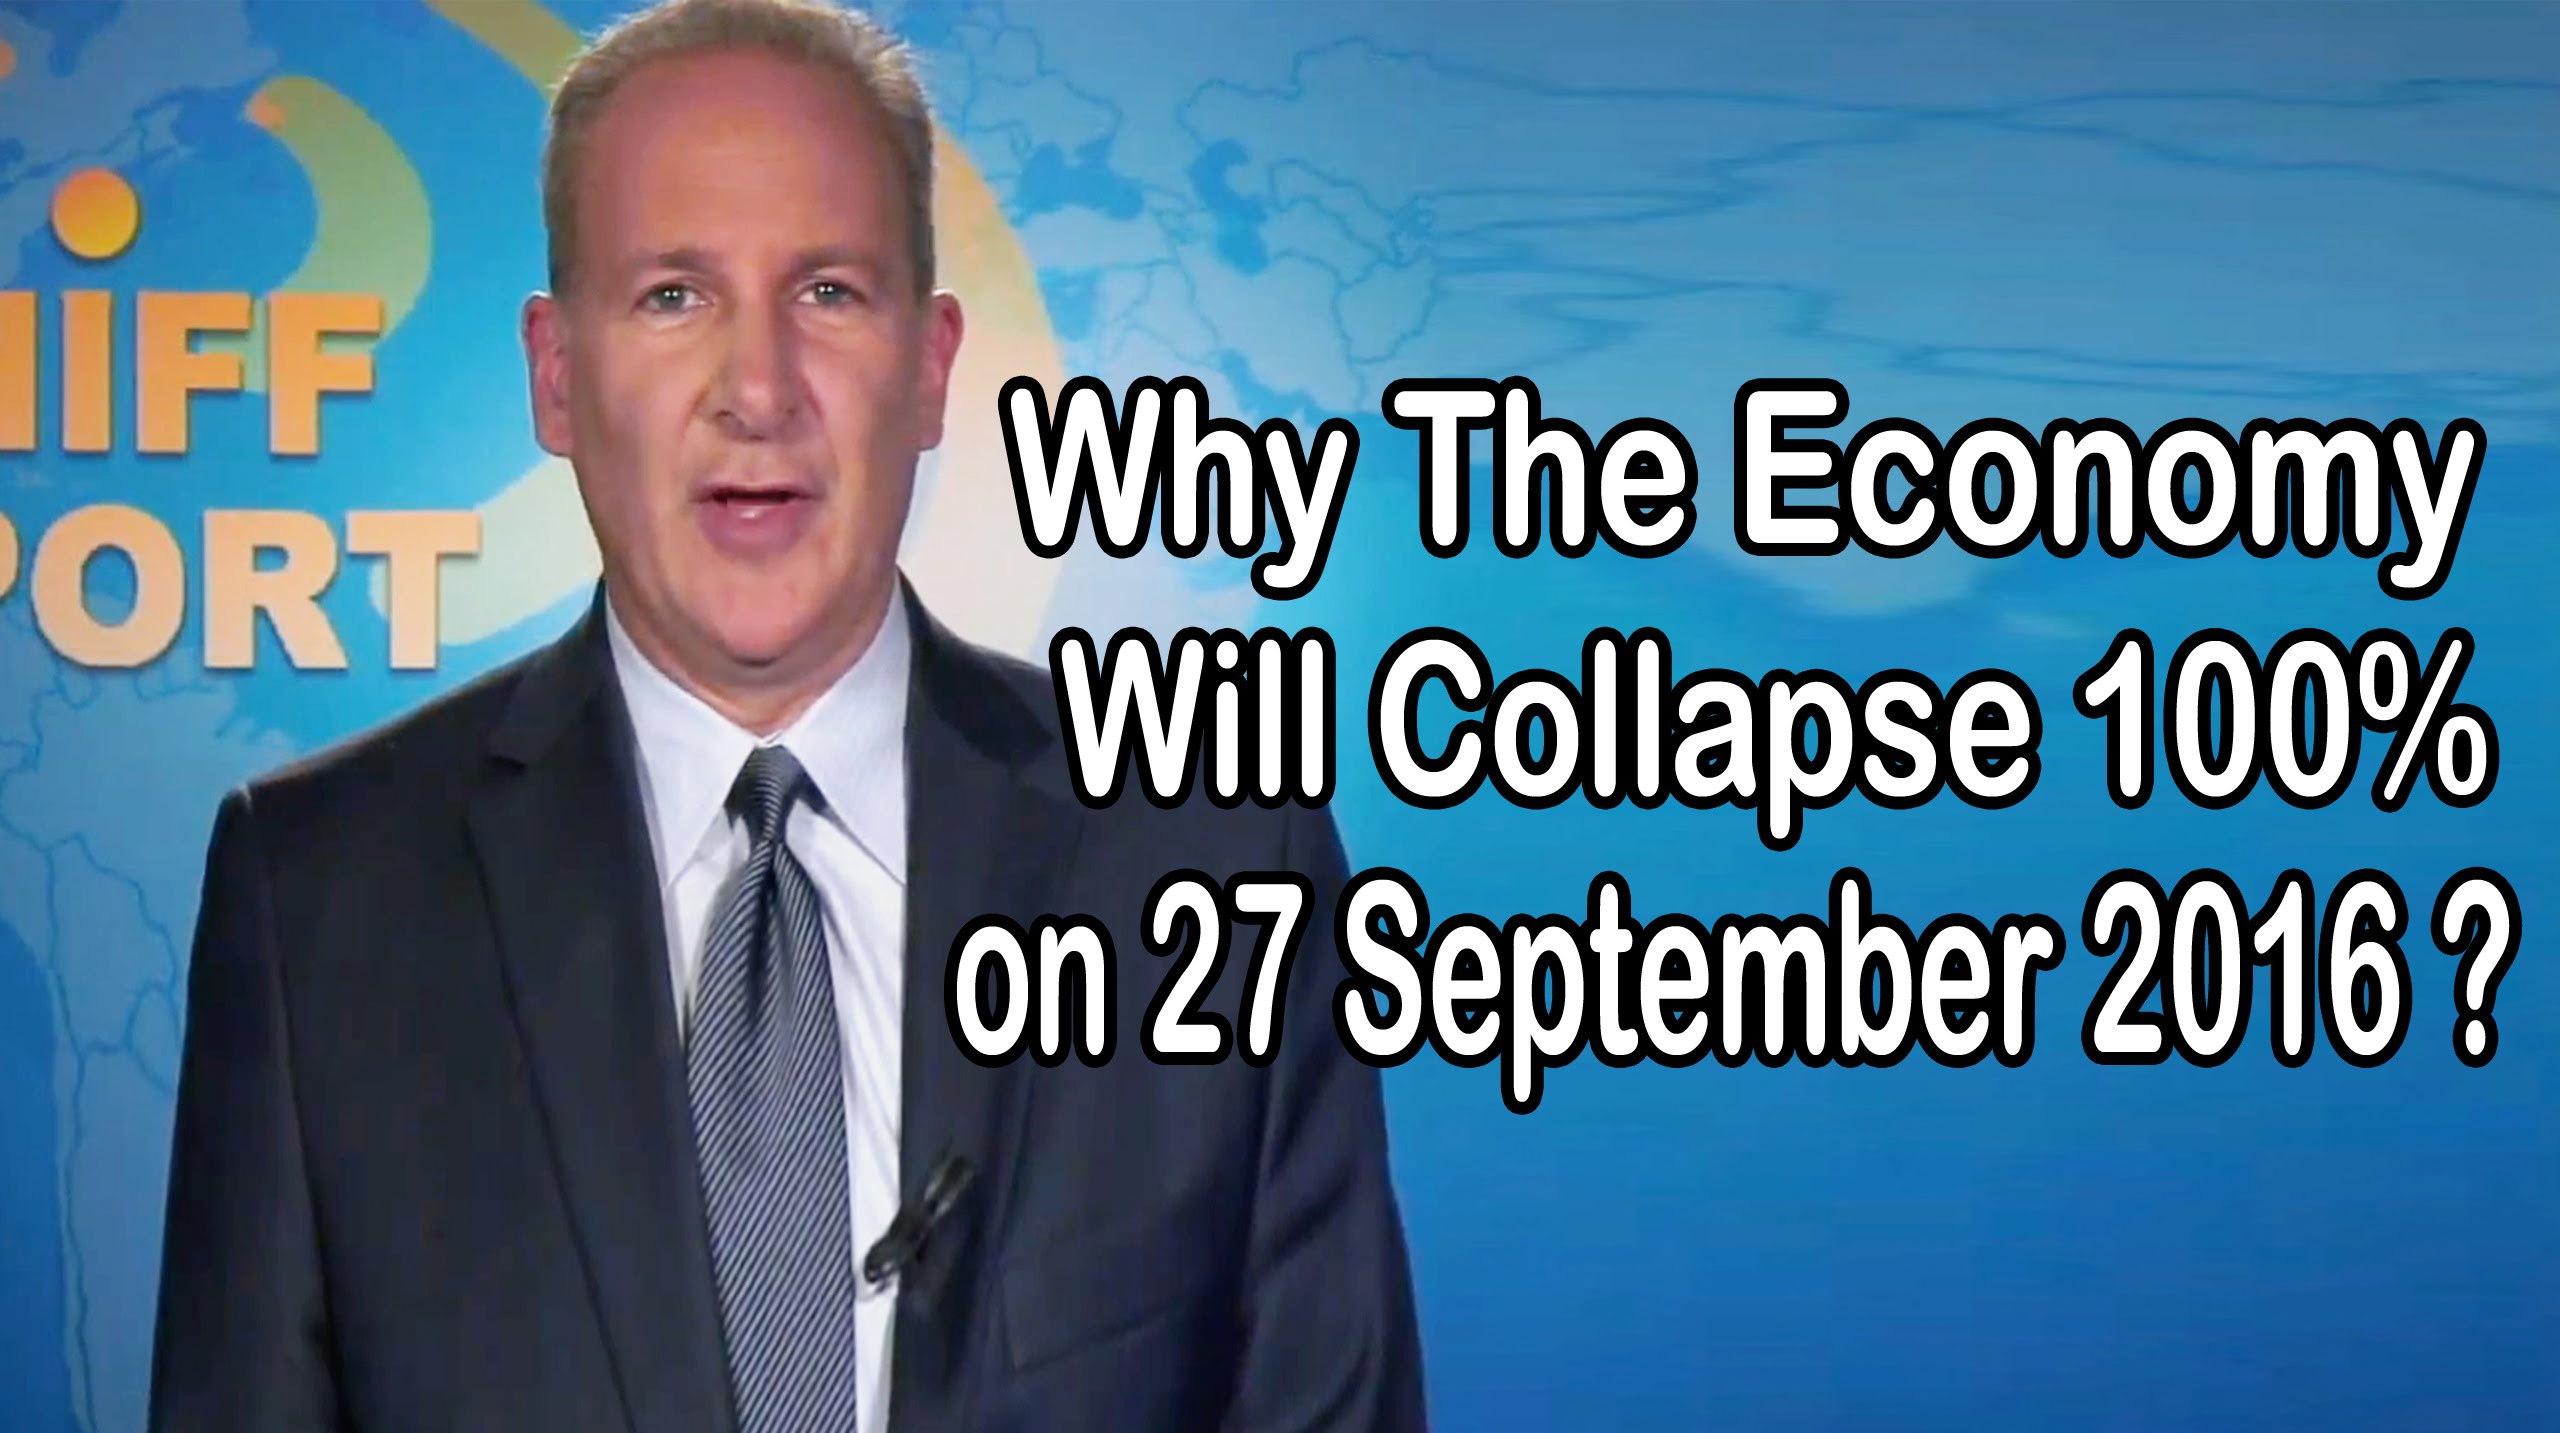 Peter Schiff : Why The Economy Will Collapse 100% on 27 September 2016 ?